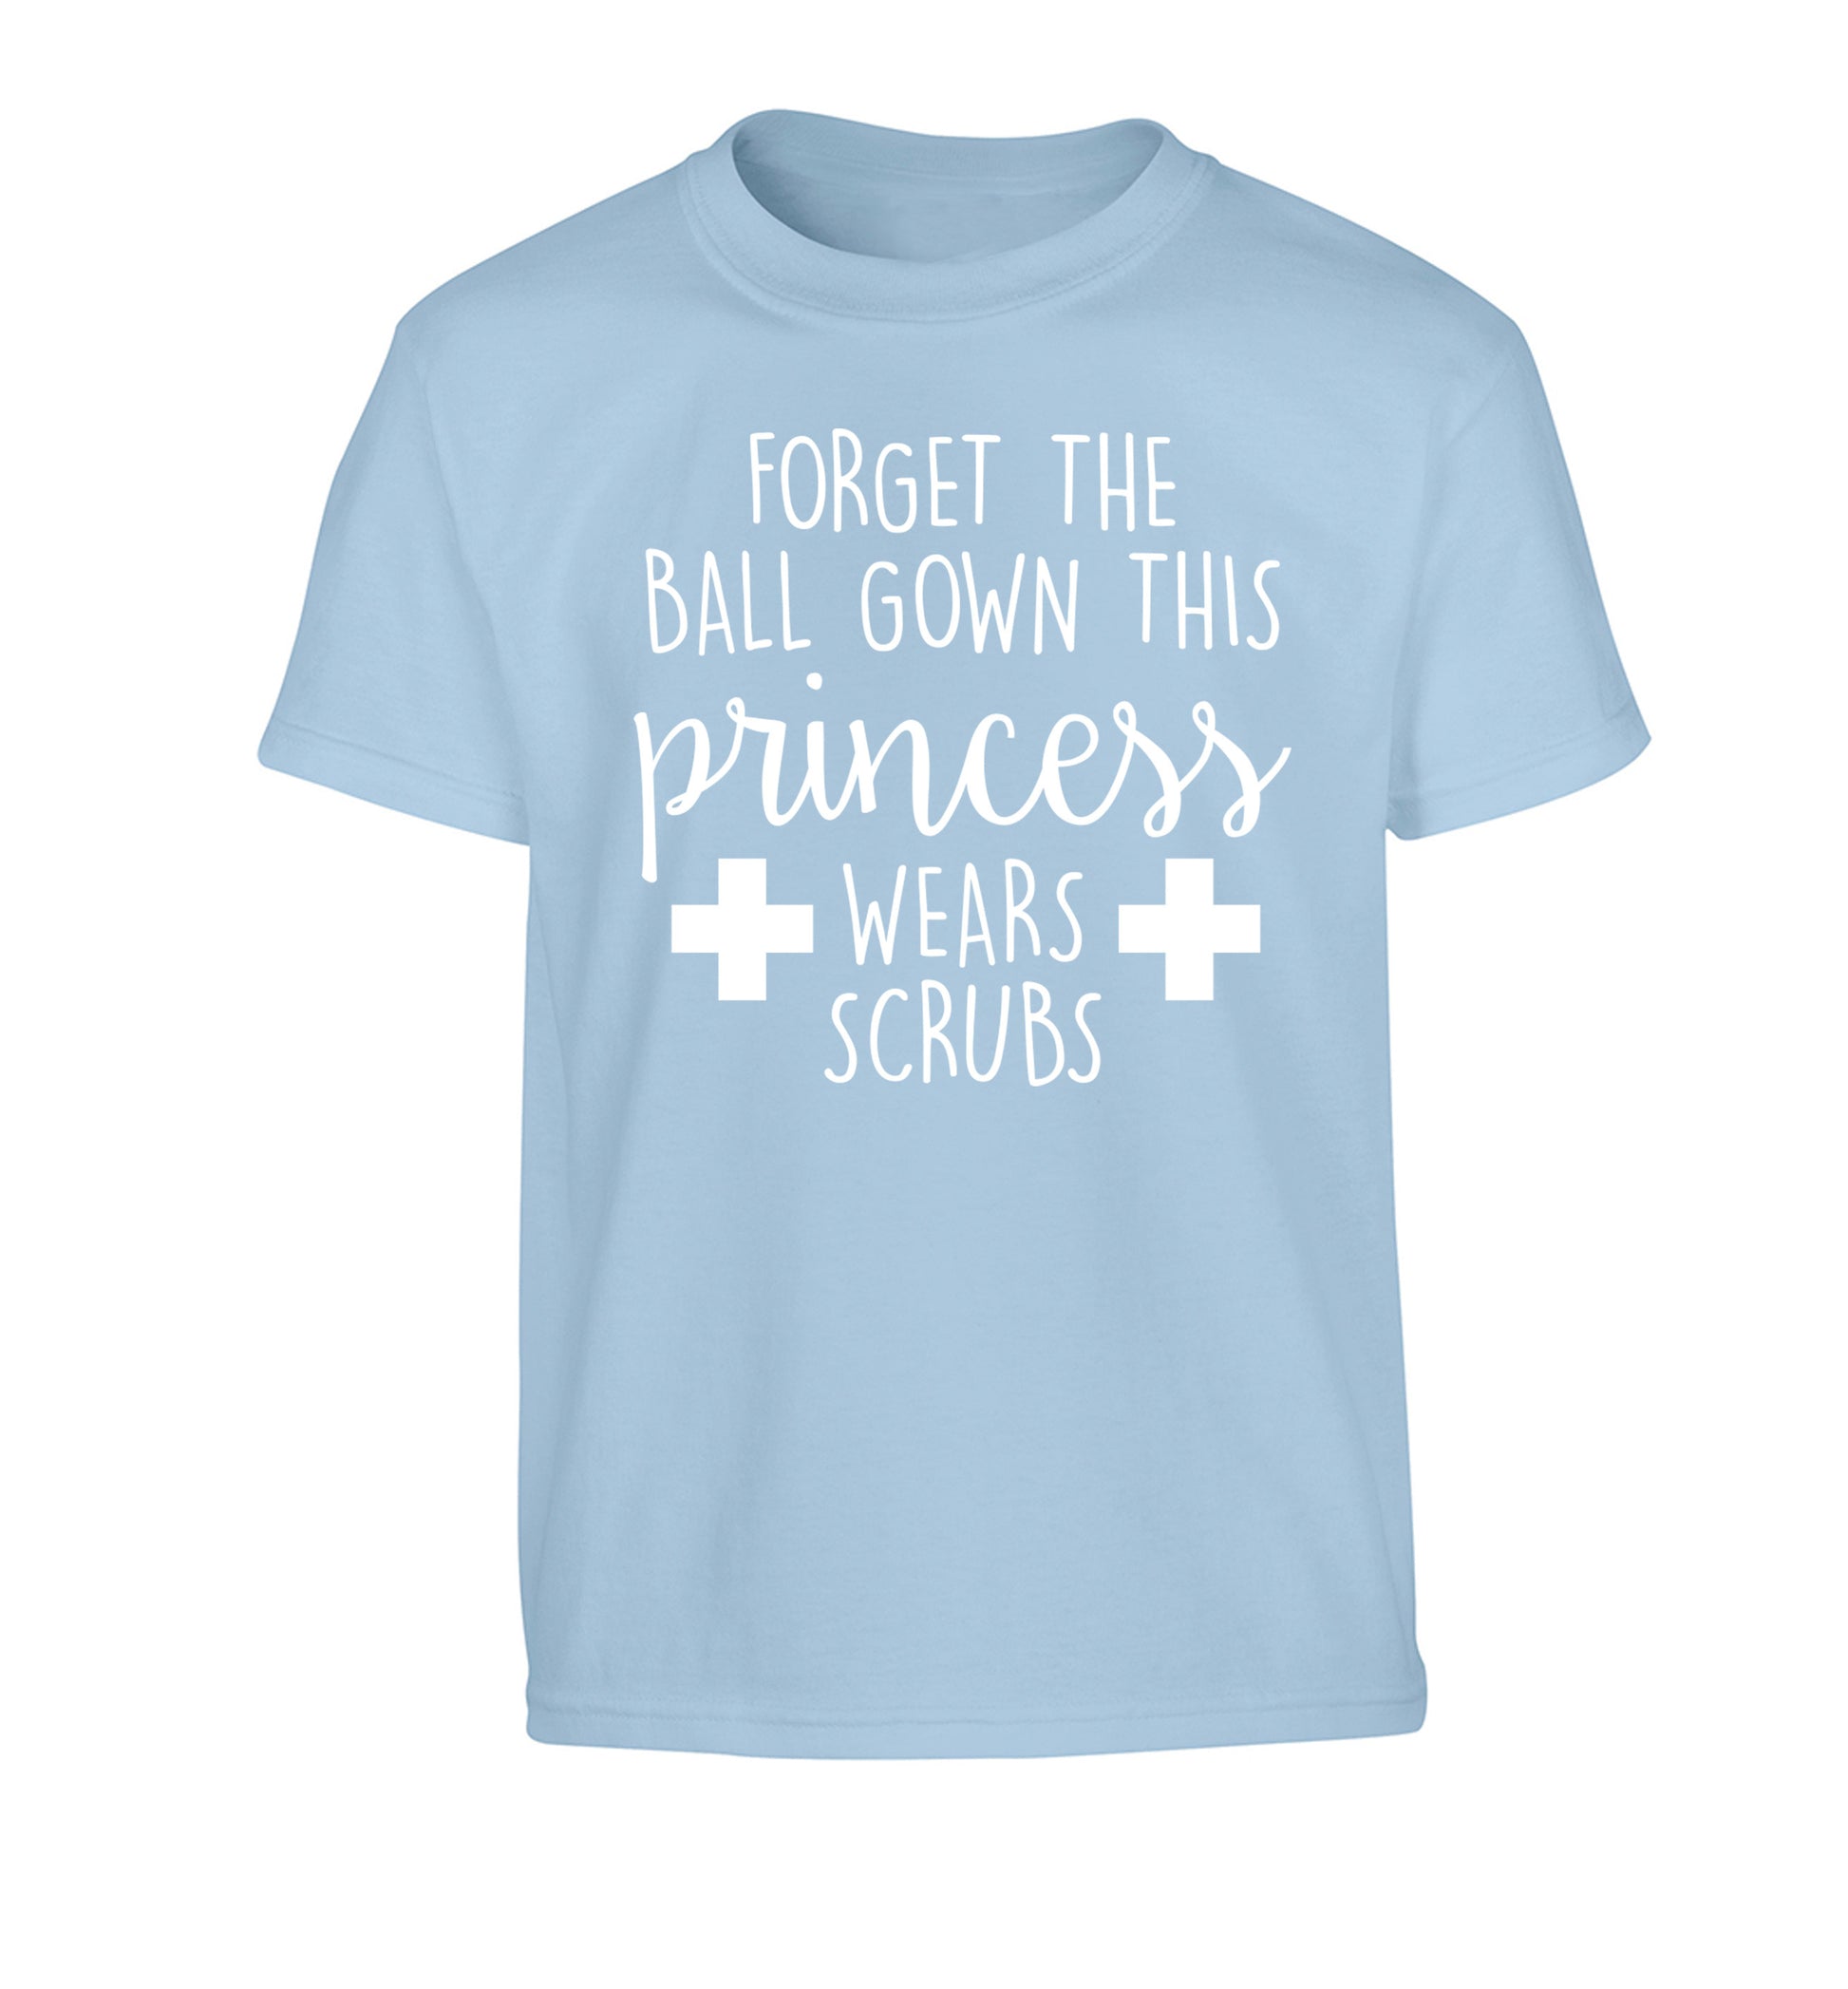 Forget the ball gown this princess wears scrubs Children's light blue Tshirt 12-14 Years